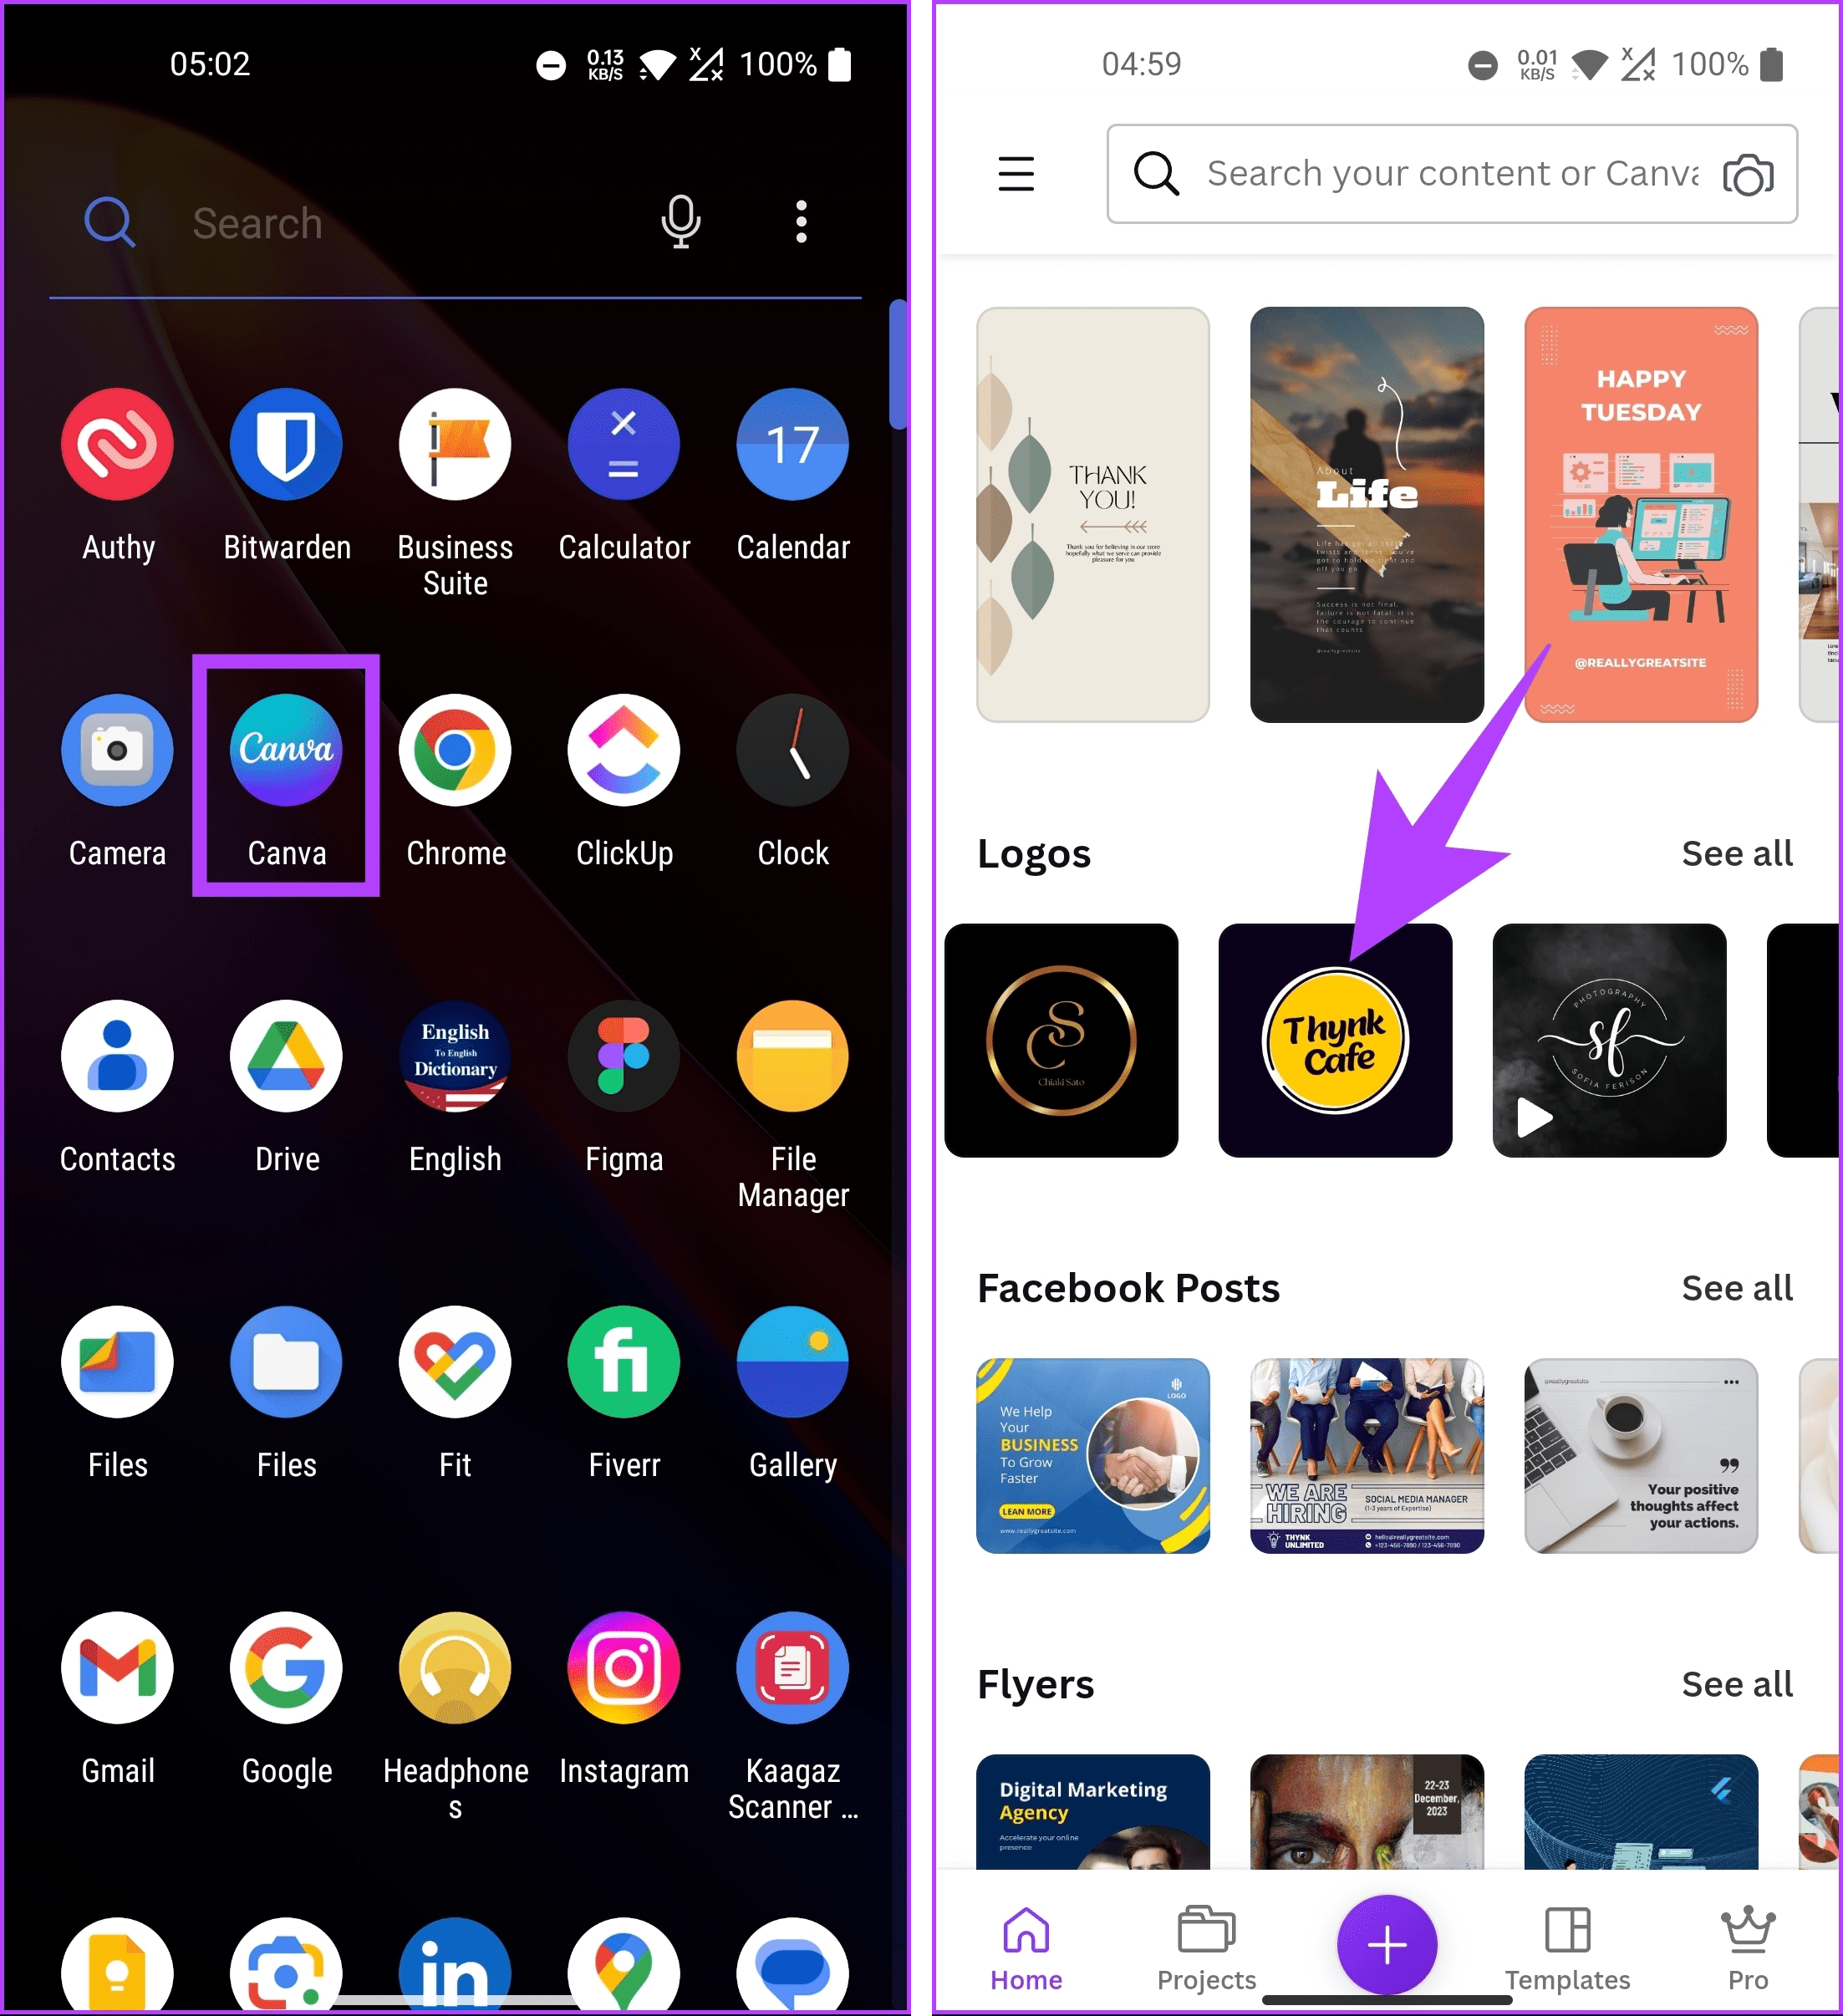 tap on any image under the Logo section